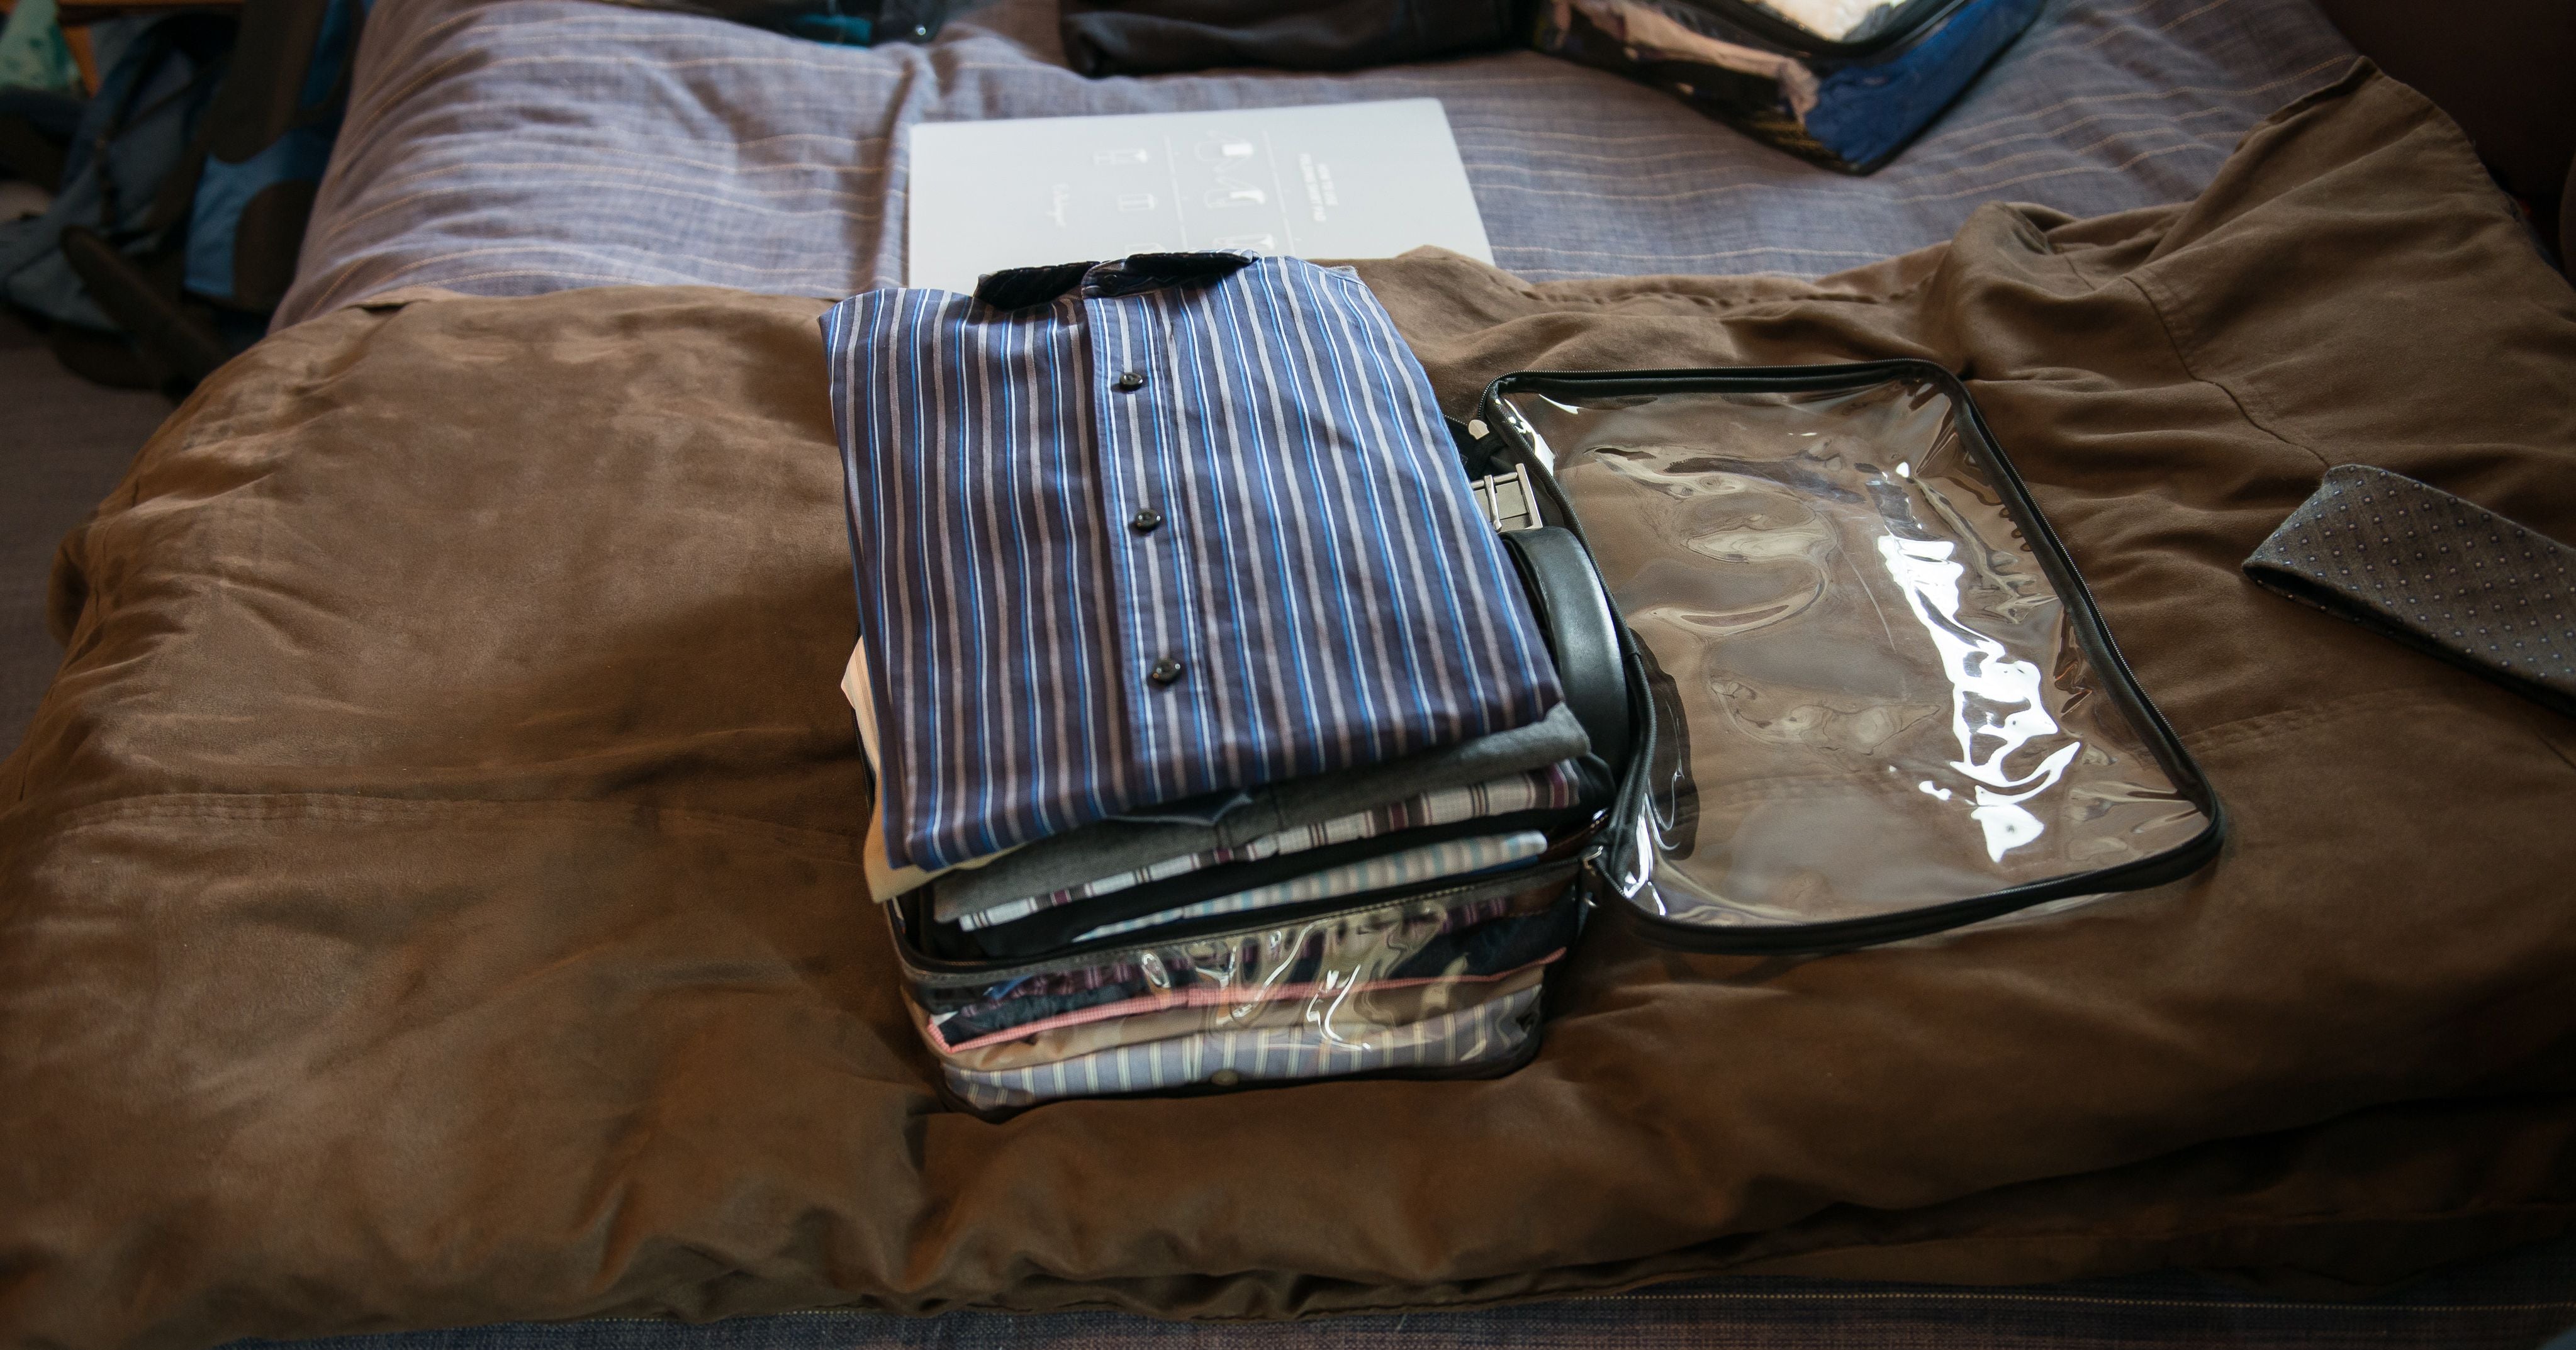 button down shirts and other dad clothes in a medium cube